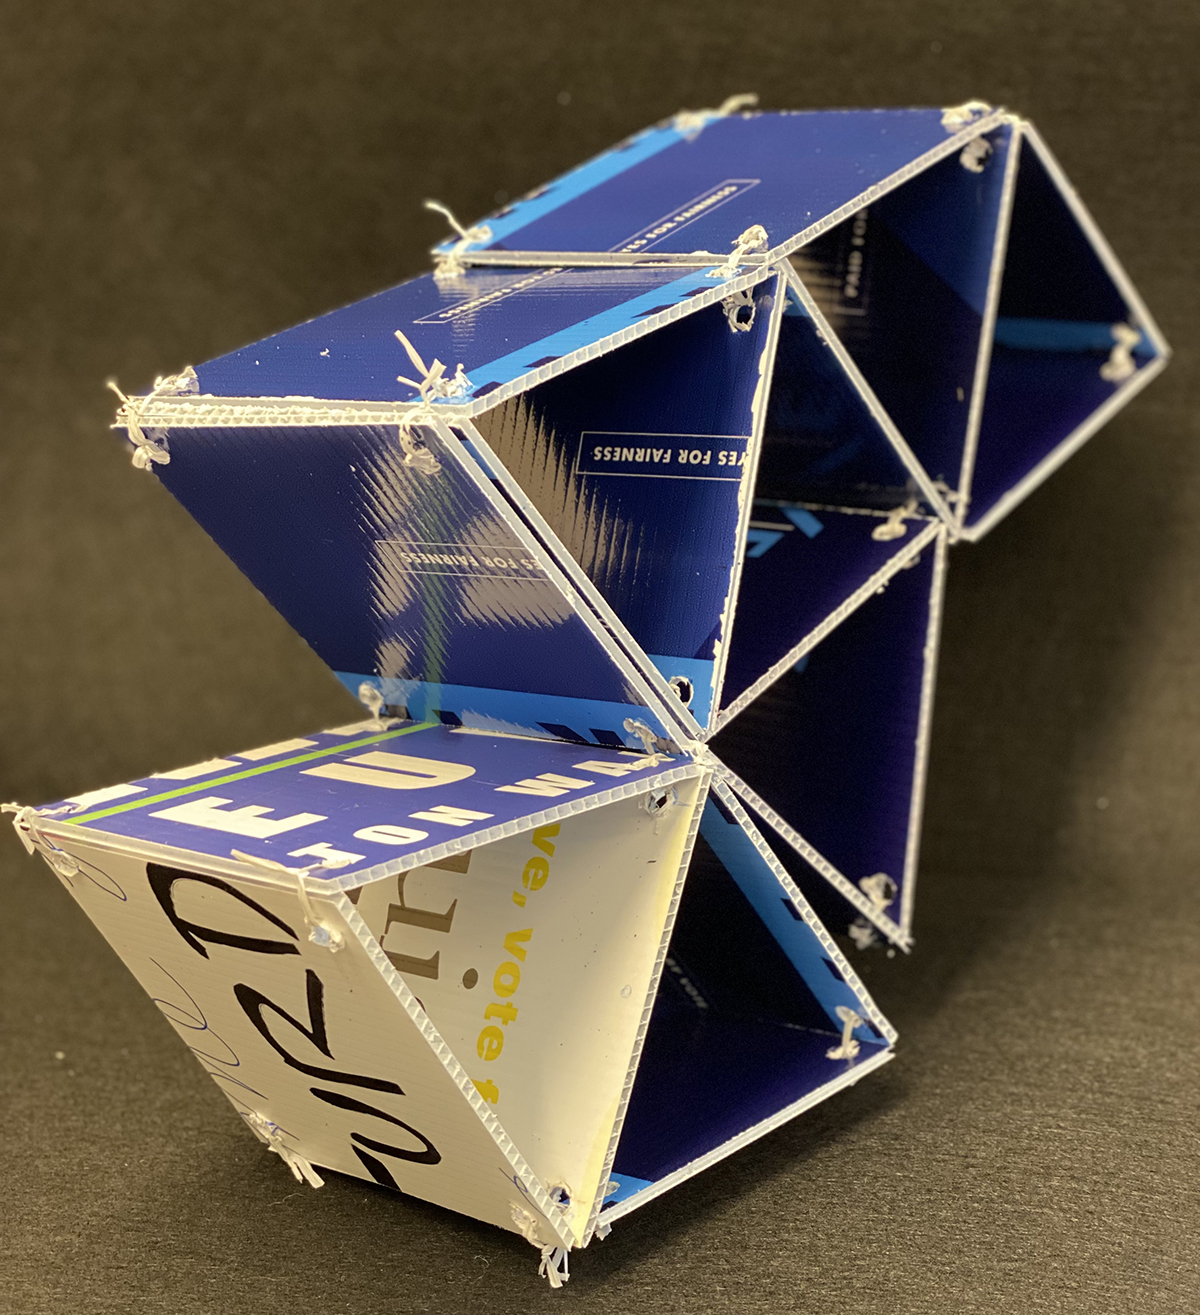 plastic square building blocks into a shape of triangles, blue and white